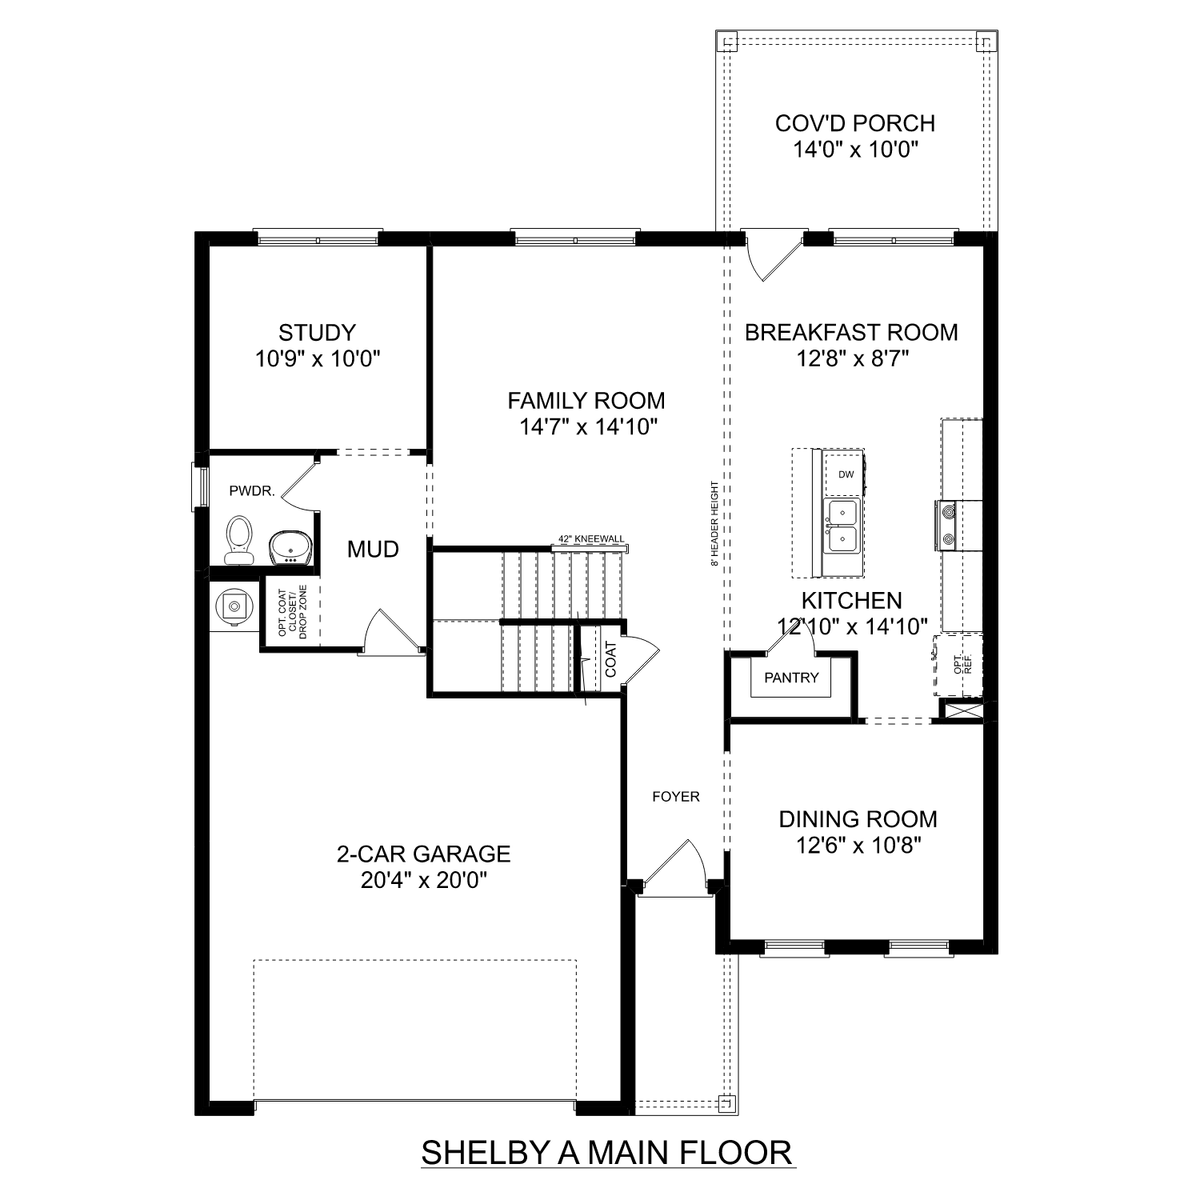 1 - The Shelby A buildable floor plan layout in Davidson Homes' Spragins Cove community.